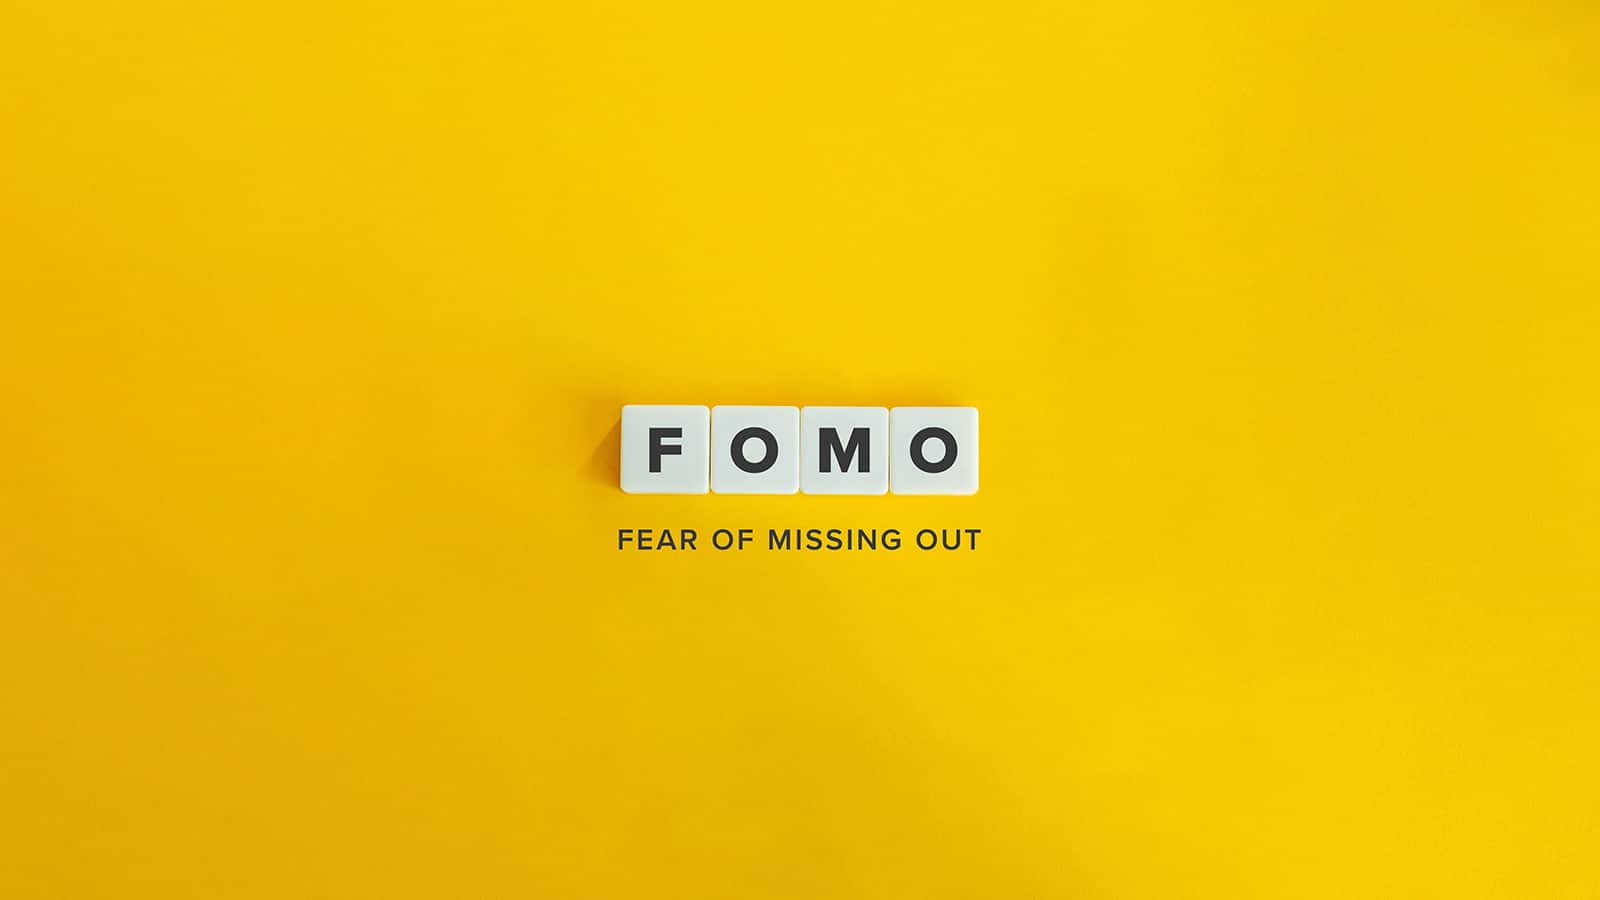 What Percentage of People Make Purchases Due to FOMO?